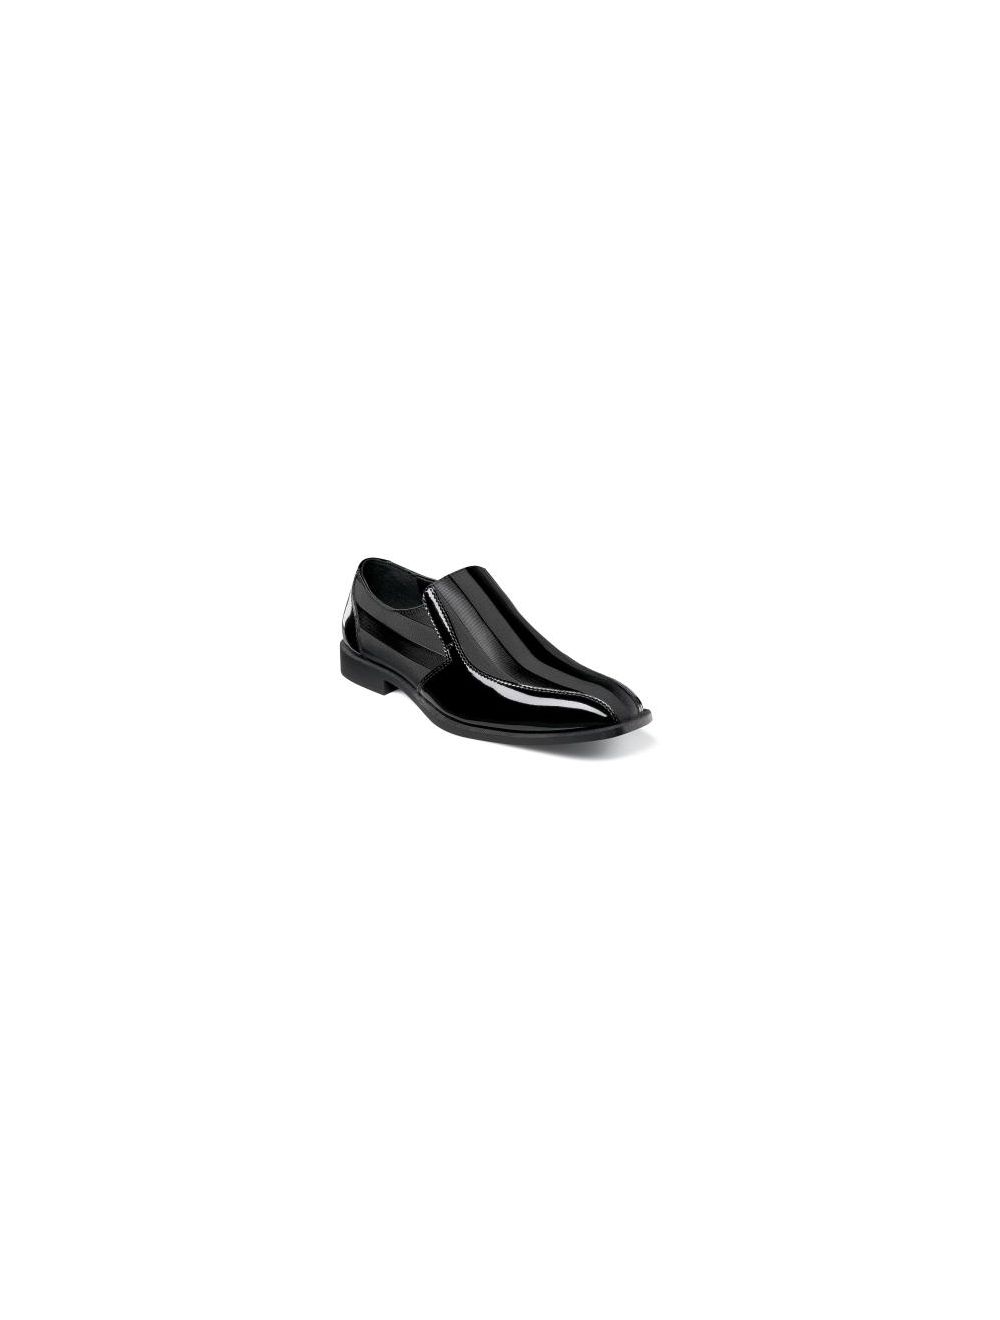 Stacy Adams Regalia Patent Leather Loafer